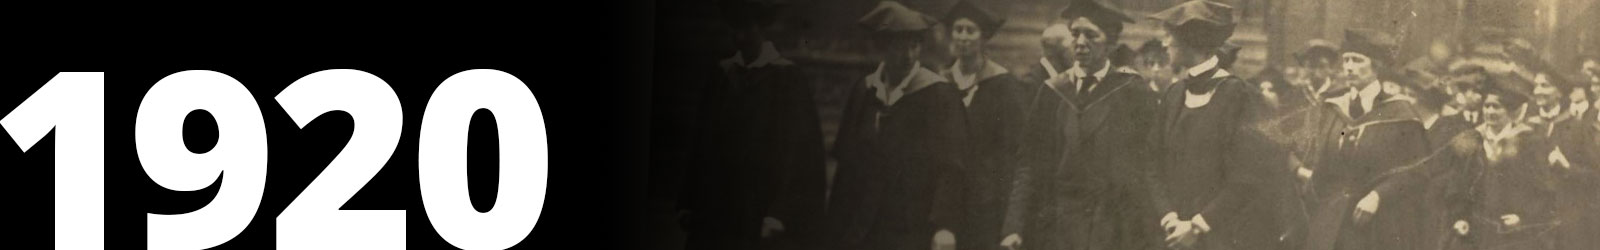 1920 header for History timeline, date and image depicting the first women to be awarded degrees at Oxford University